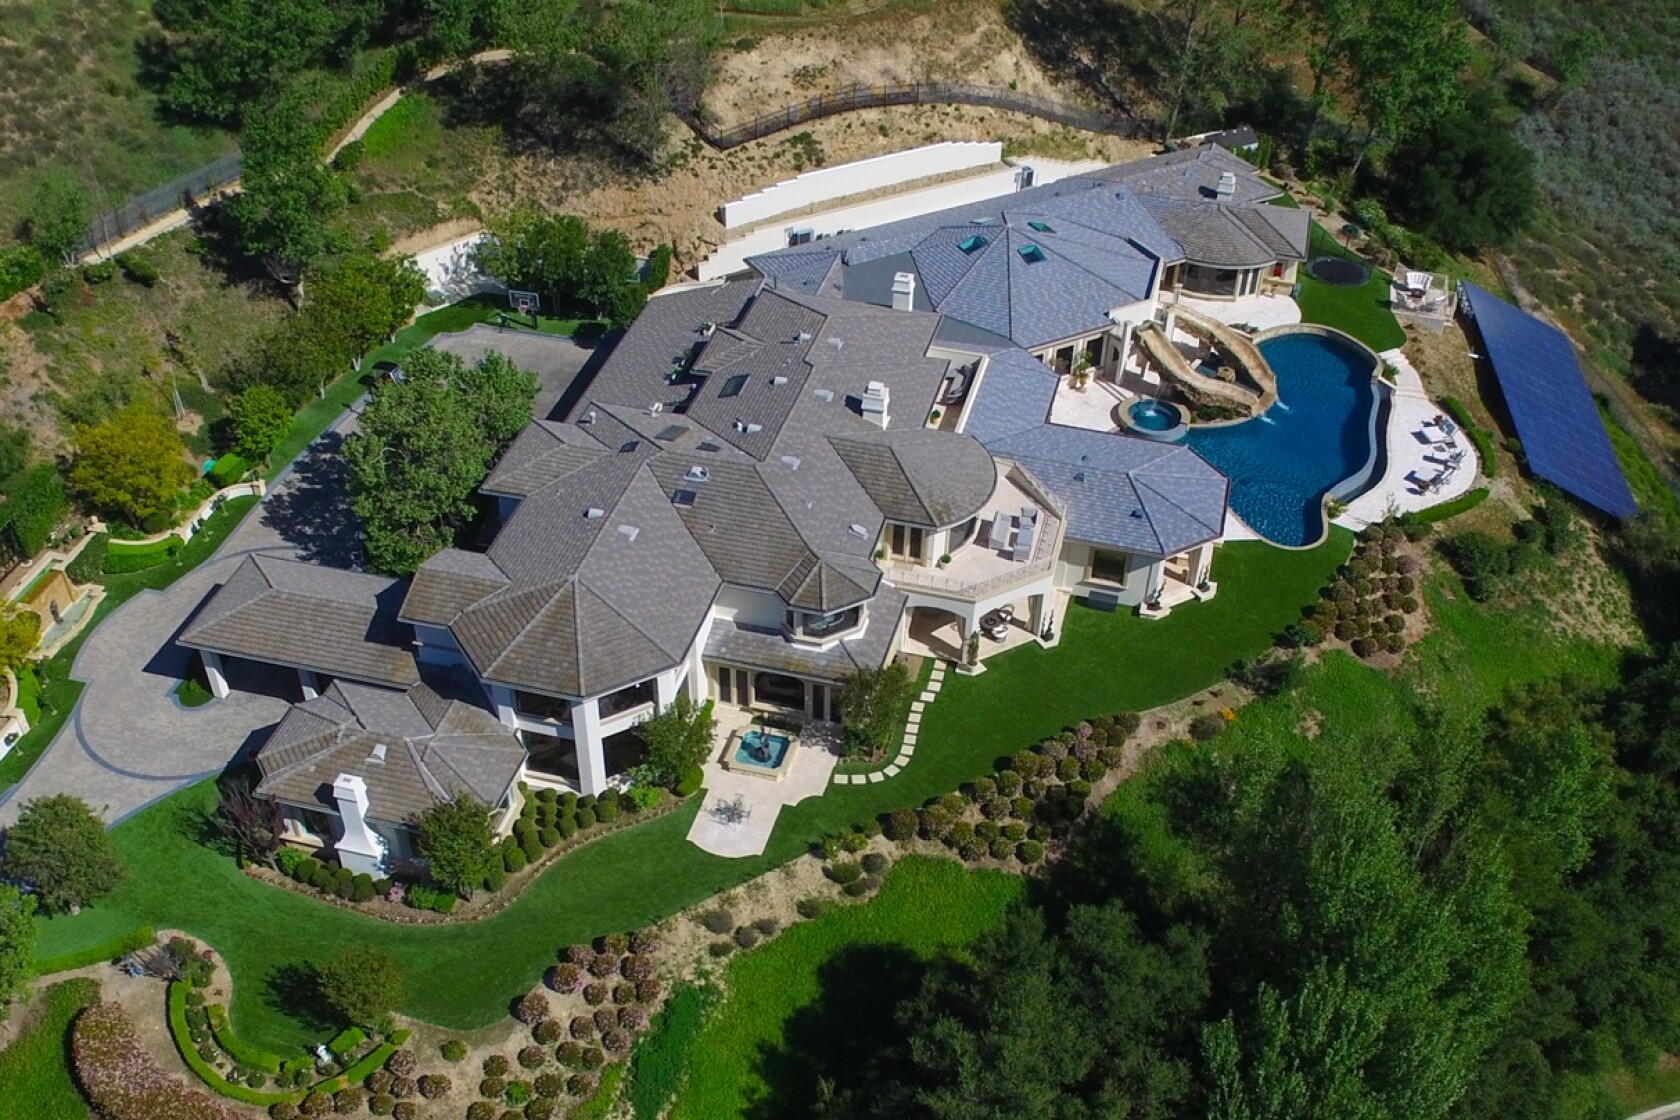 Los Angeles Luxury House For Sale $78,000,000 41,000 M², 55% OFF